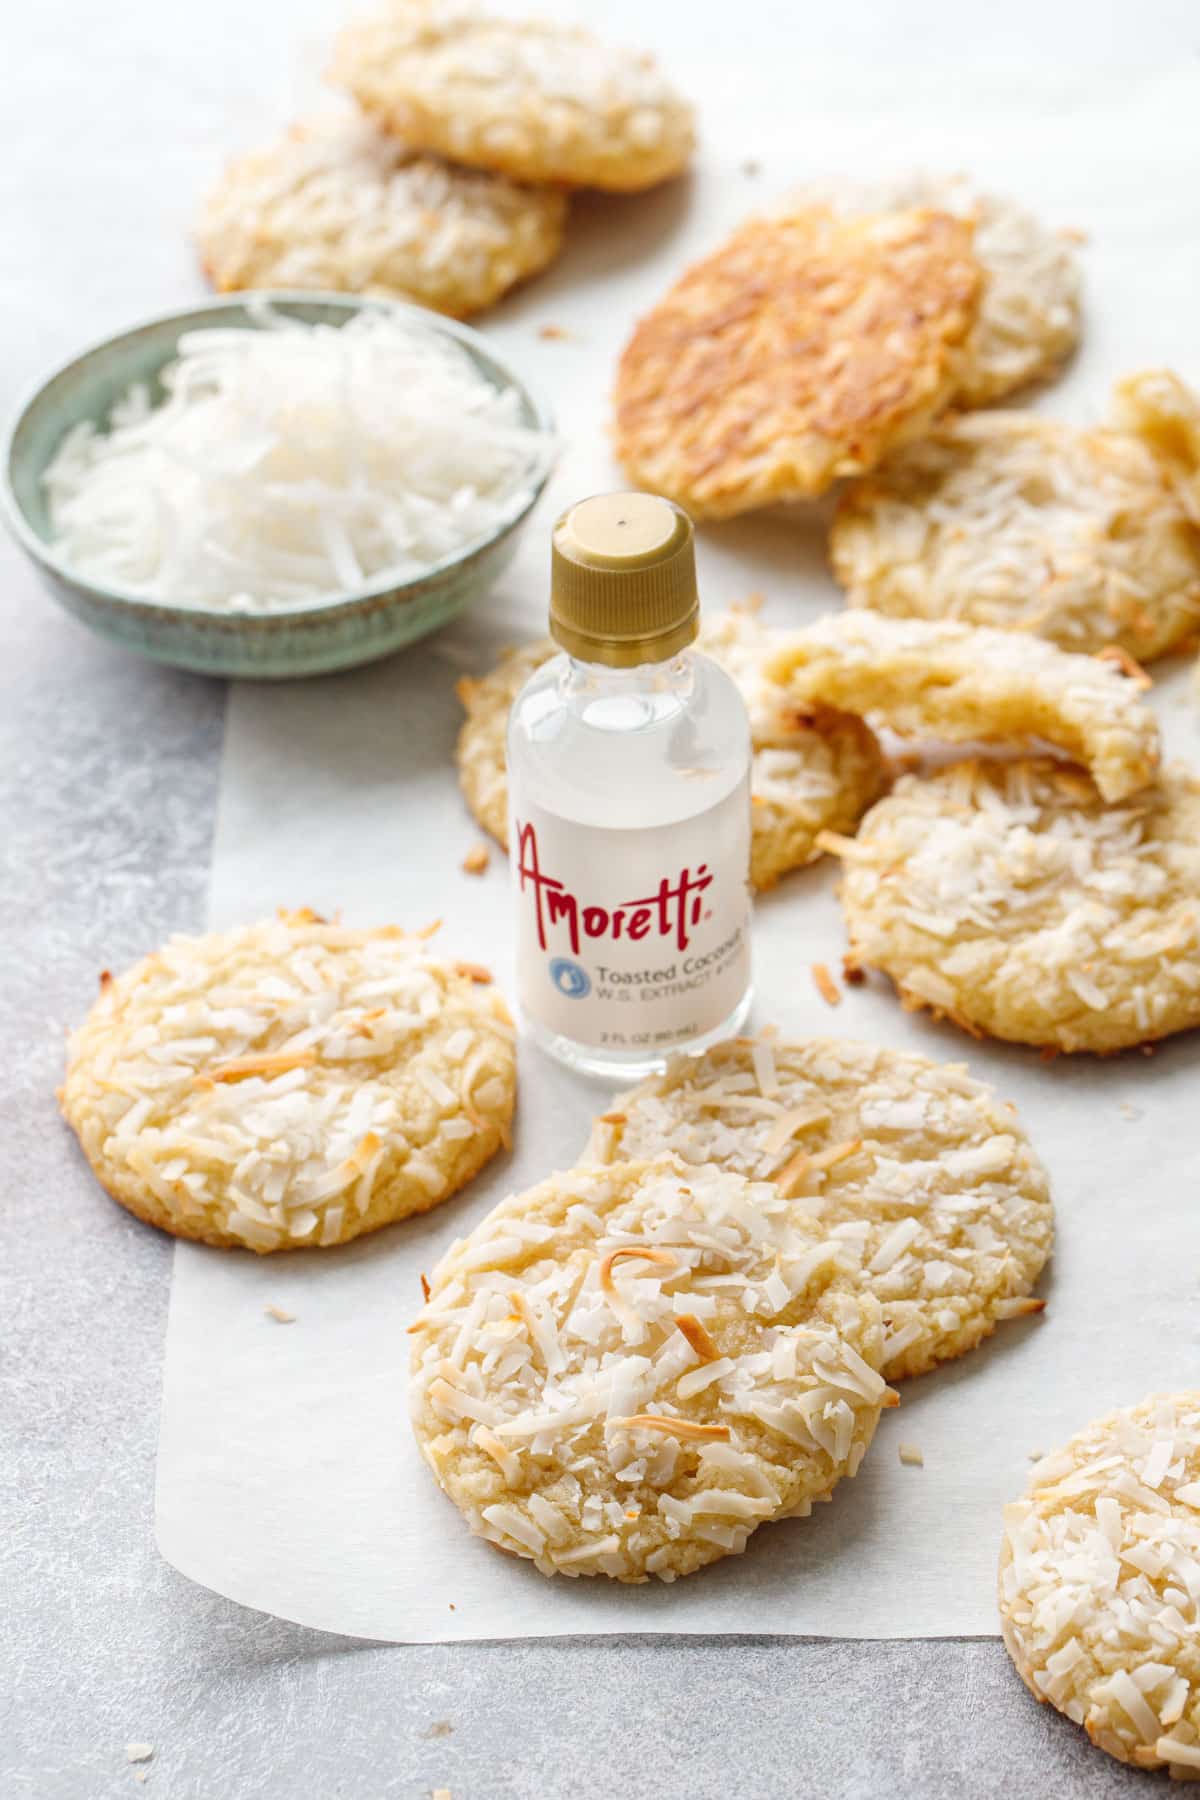 Toasted Coconut Sugar Cookies scattered on a piece of parchment, with bottle of Amoretti coconut extract in the middle.